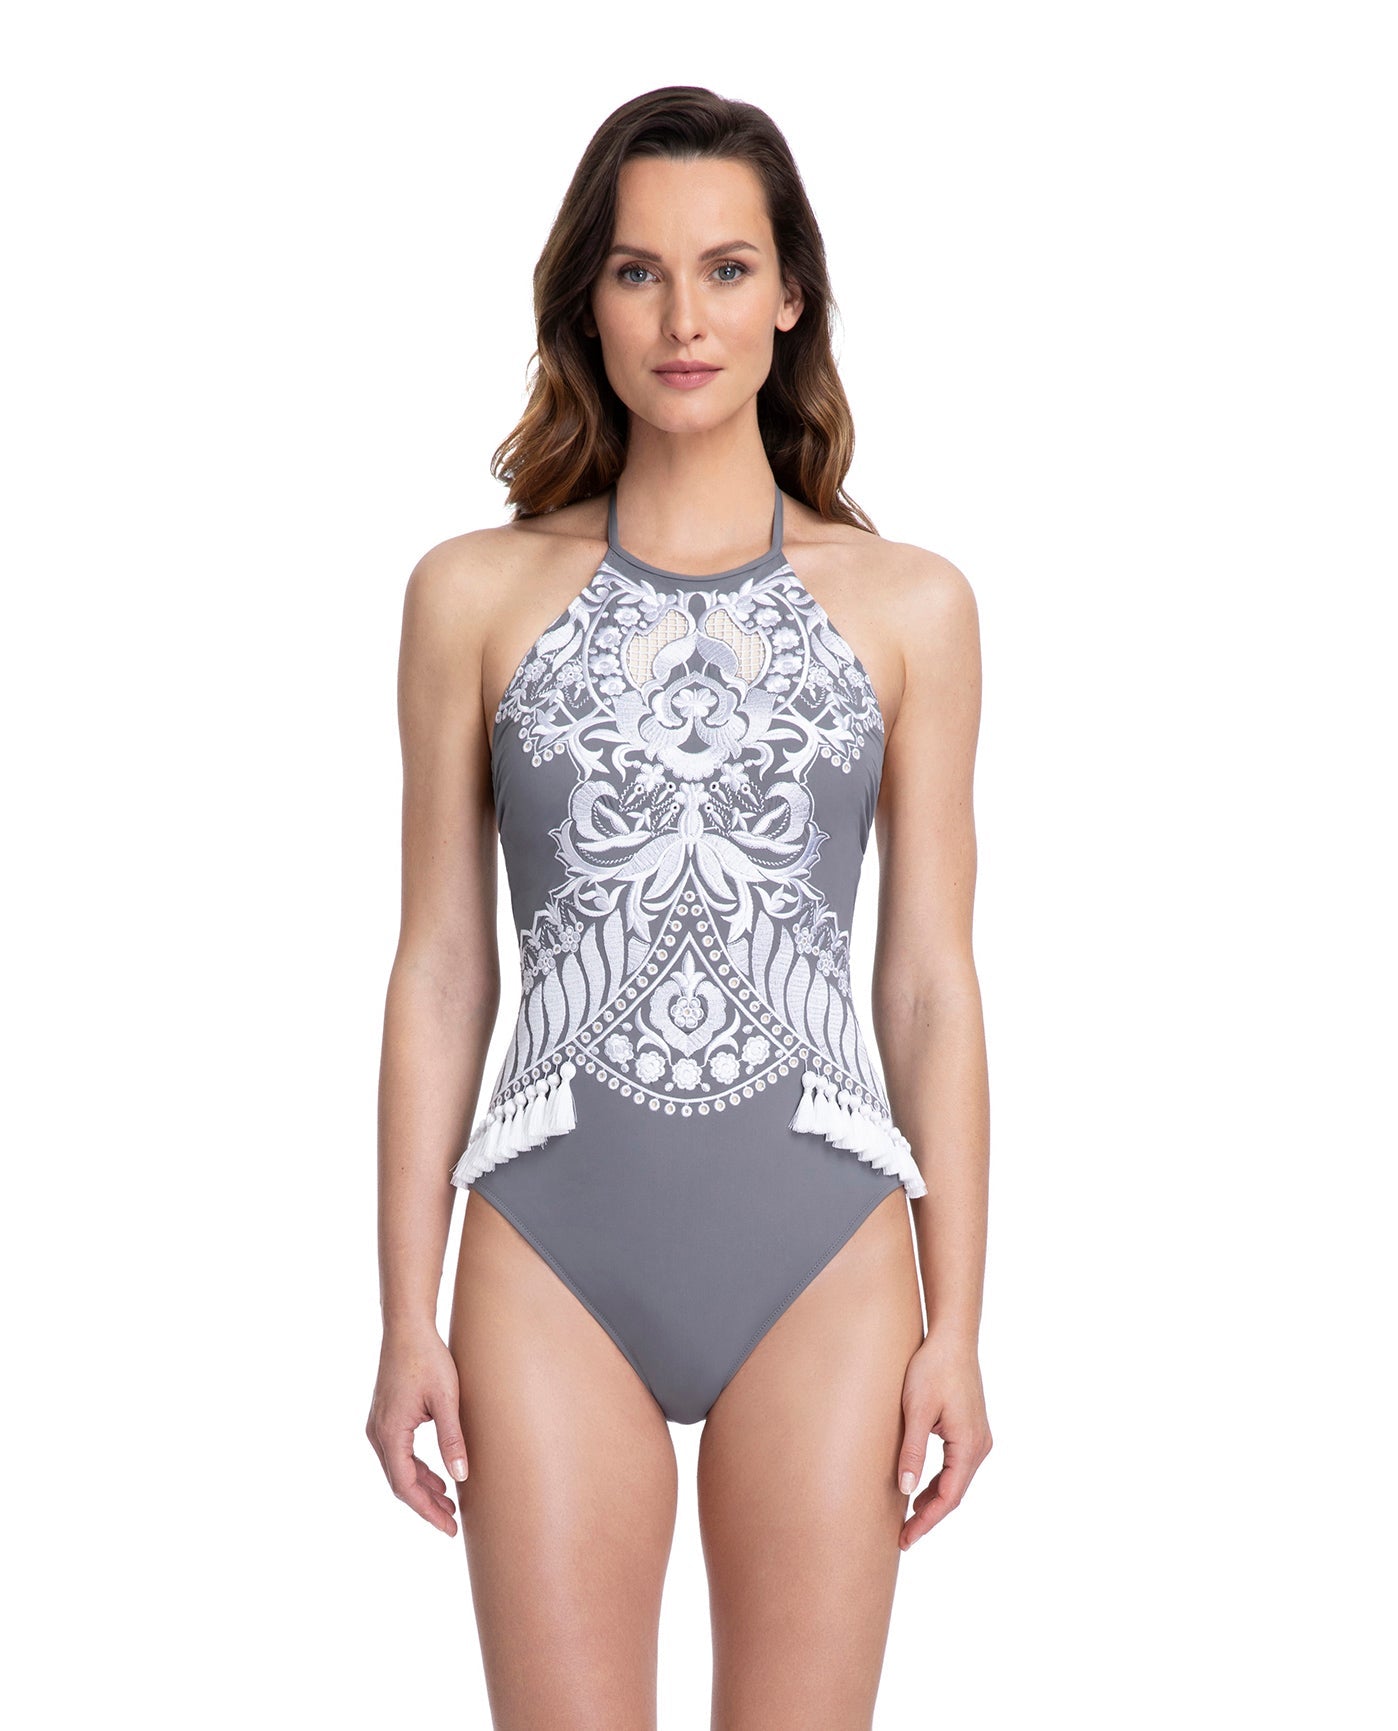 Front View Of Gottex Couture Lyra High Neck Halter One Piece Swimsuit | Gottex Lyra